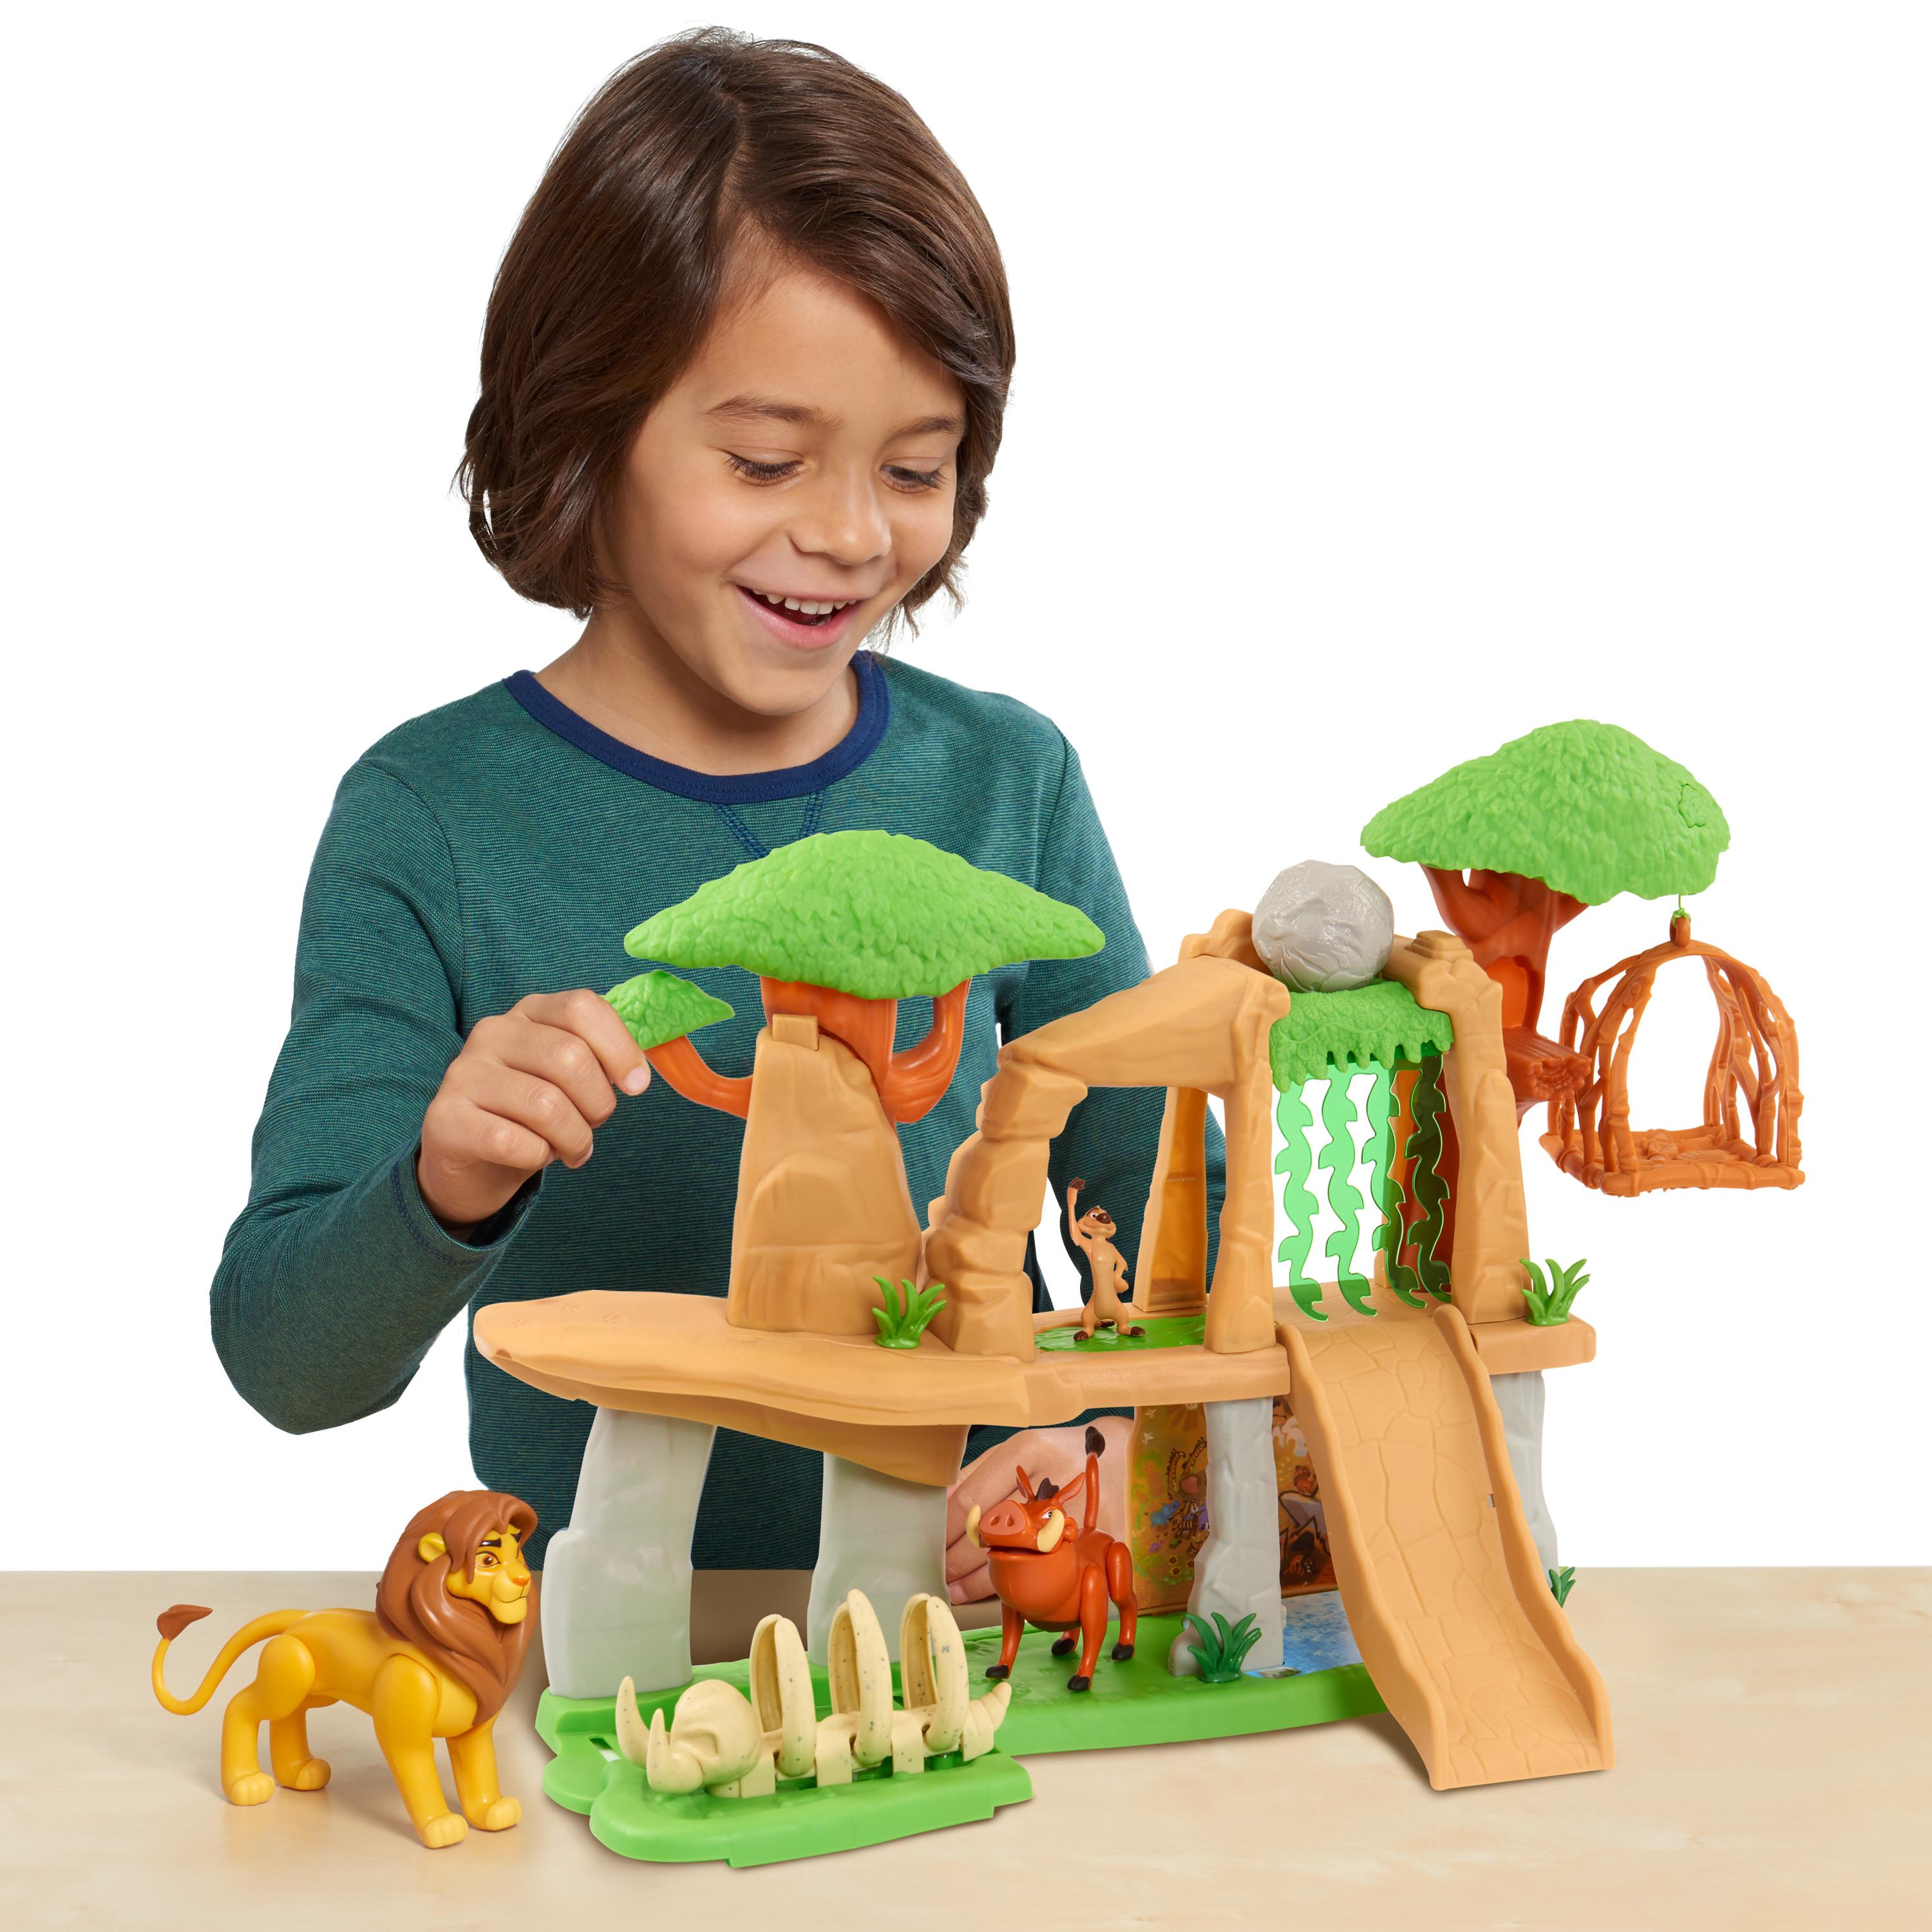 Disney the Lion King Pride Land Playset, Officially Licensed Kids Toys for Ages 3 Up, Gifts and Presents - image 2 of 3